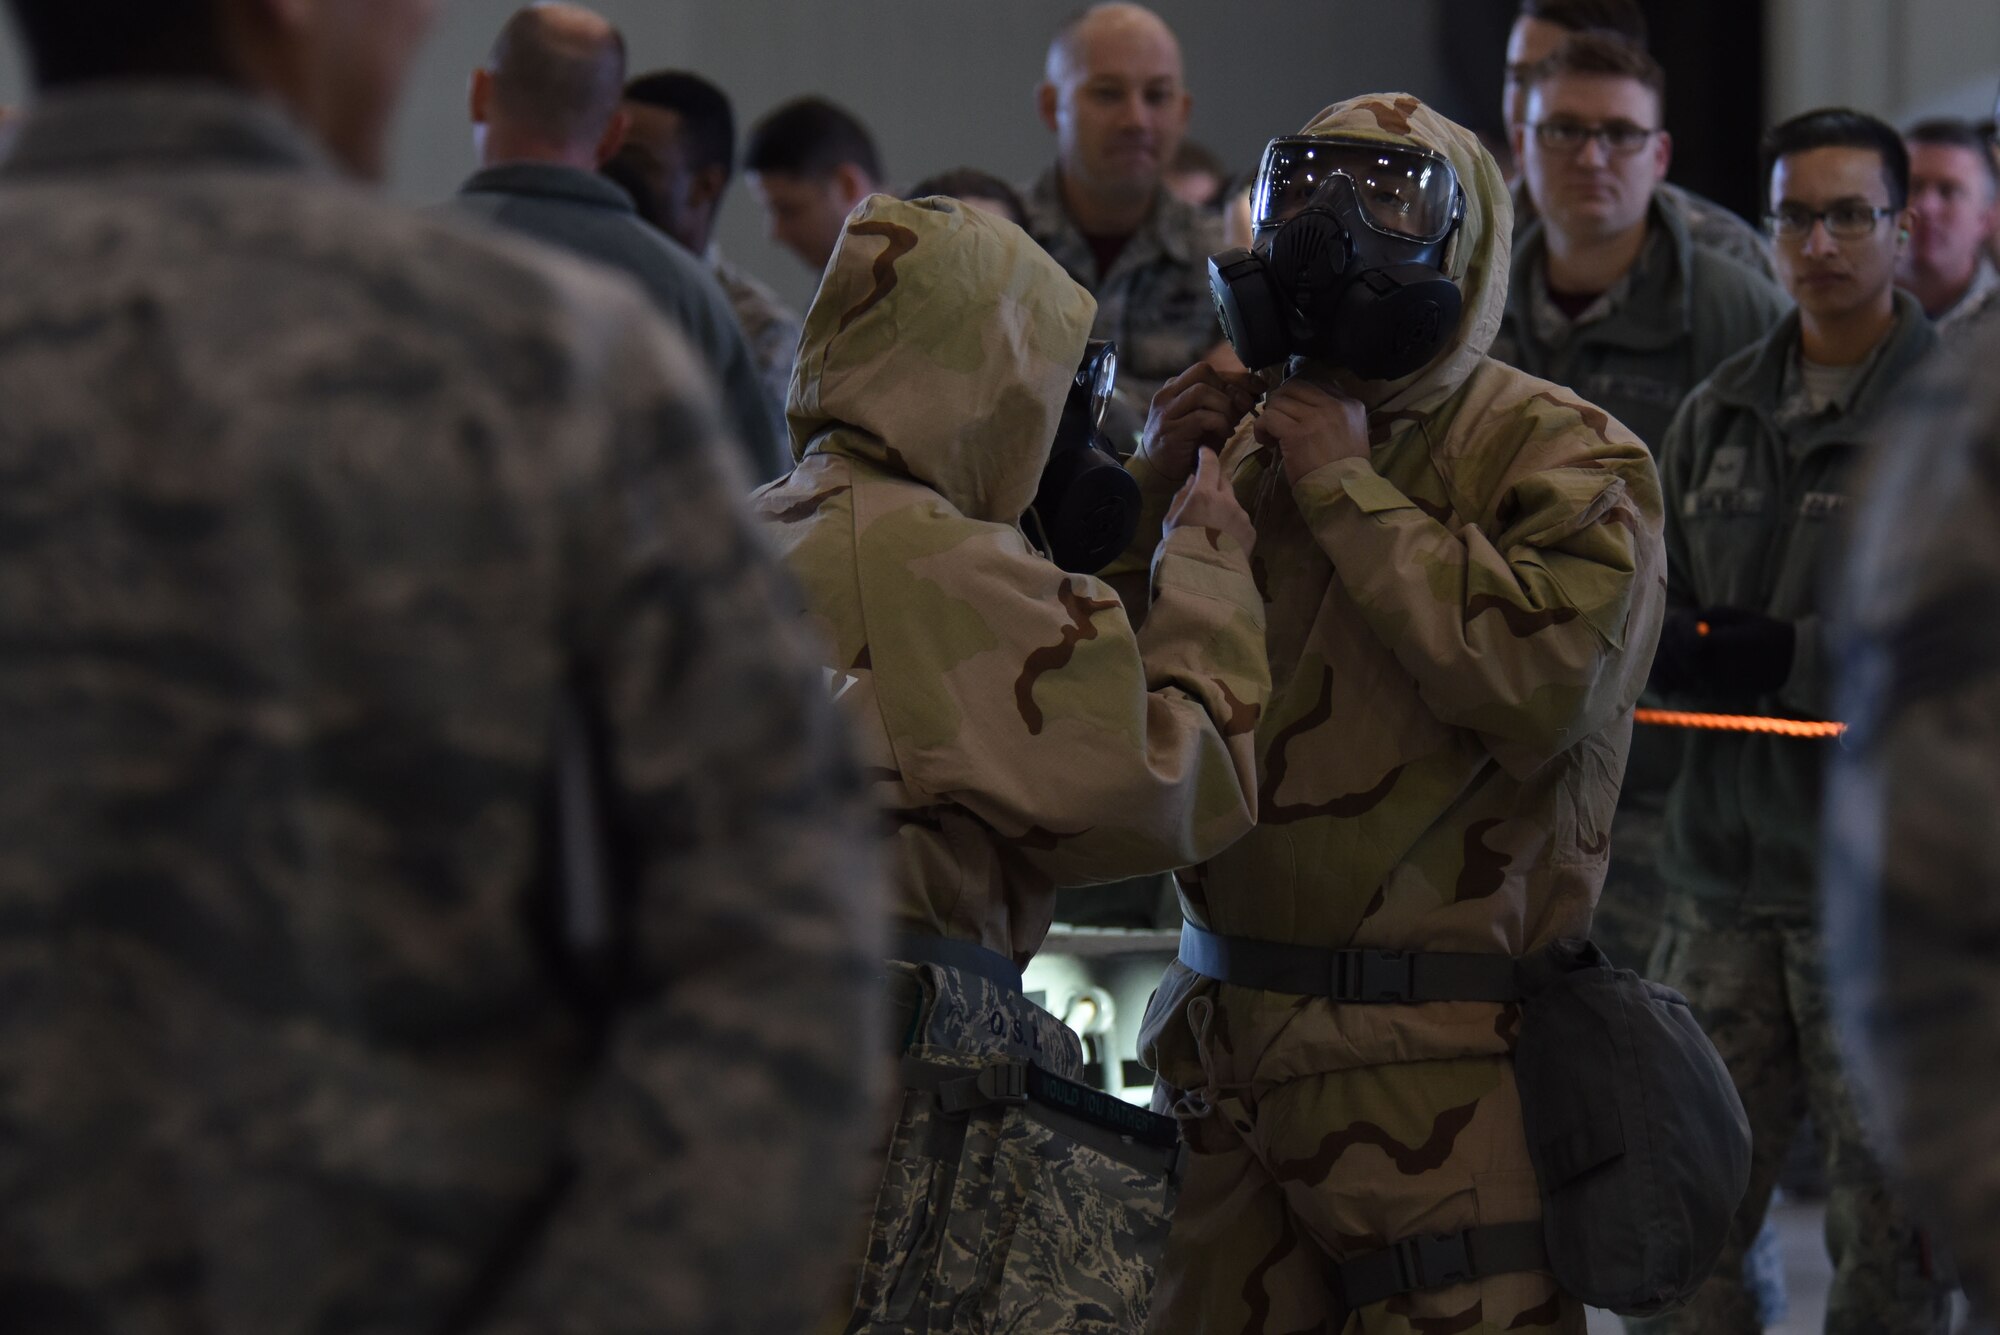 Airmen assigned to the 432nd Aircraft Maintenance Squadron Reaper Aircraft Maintenance Unit perform final chemical gear checks before a weapons load competition Dec. 8, 2017, at Creech Air Force Base, Nev. Maintenance Airmen pride themselves on staying mission ready and hosted their first weapons load competition dressed in full chemical, biological, radiological, nuclear and explosives gear in more than three years. (U.S. Air Force photo by Airman 1st Class Haley Stevens)